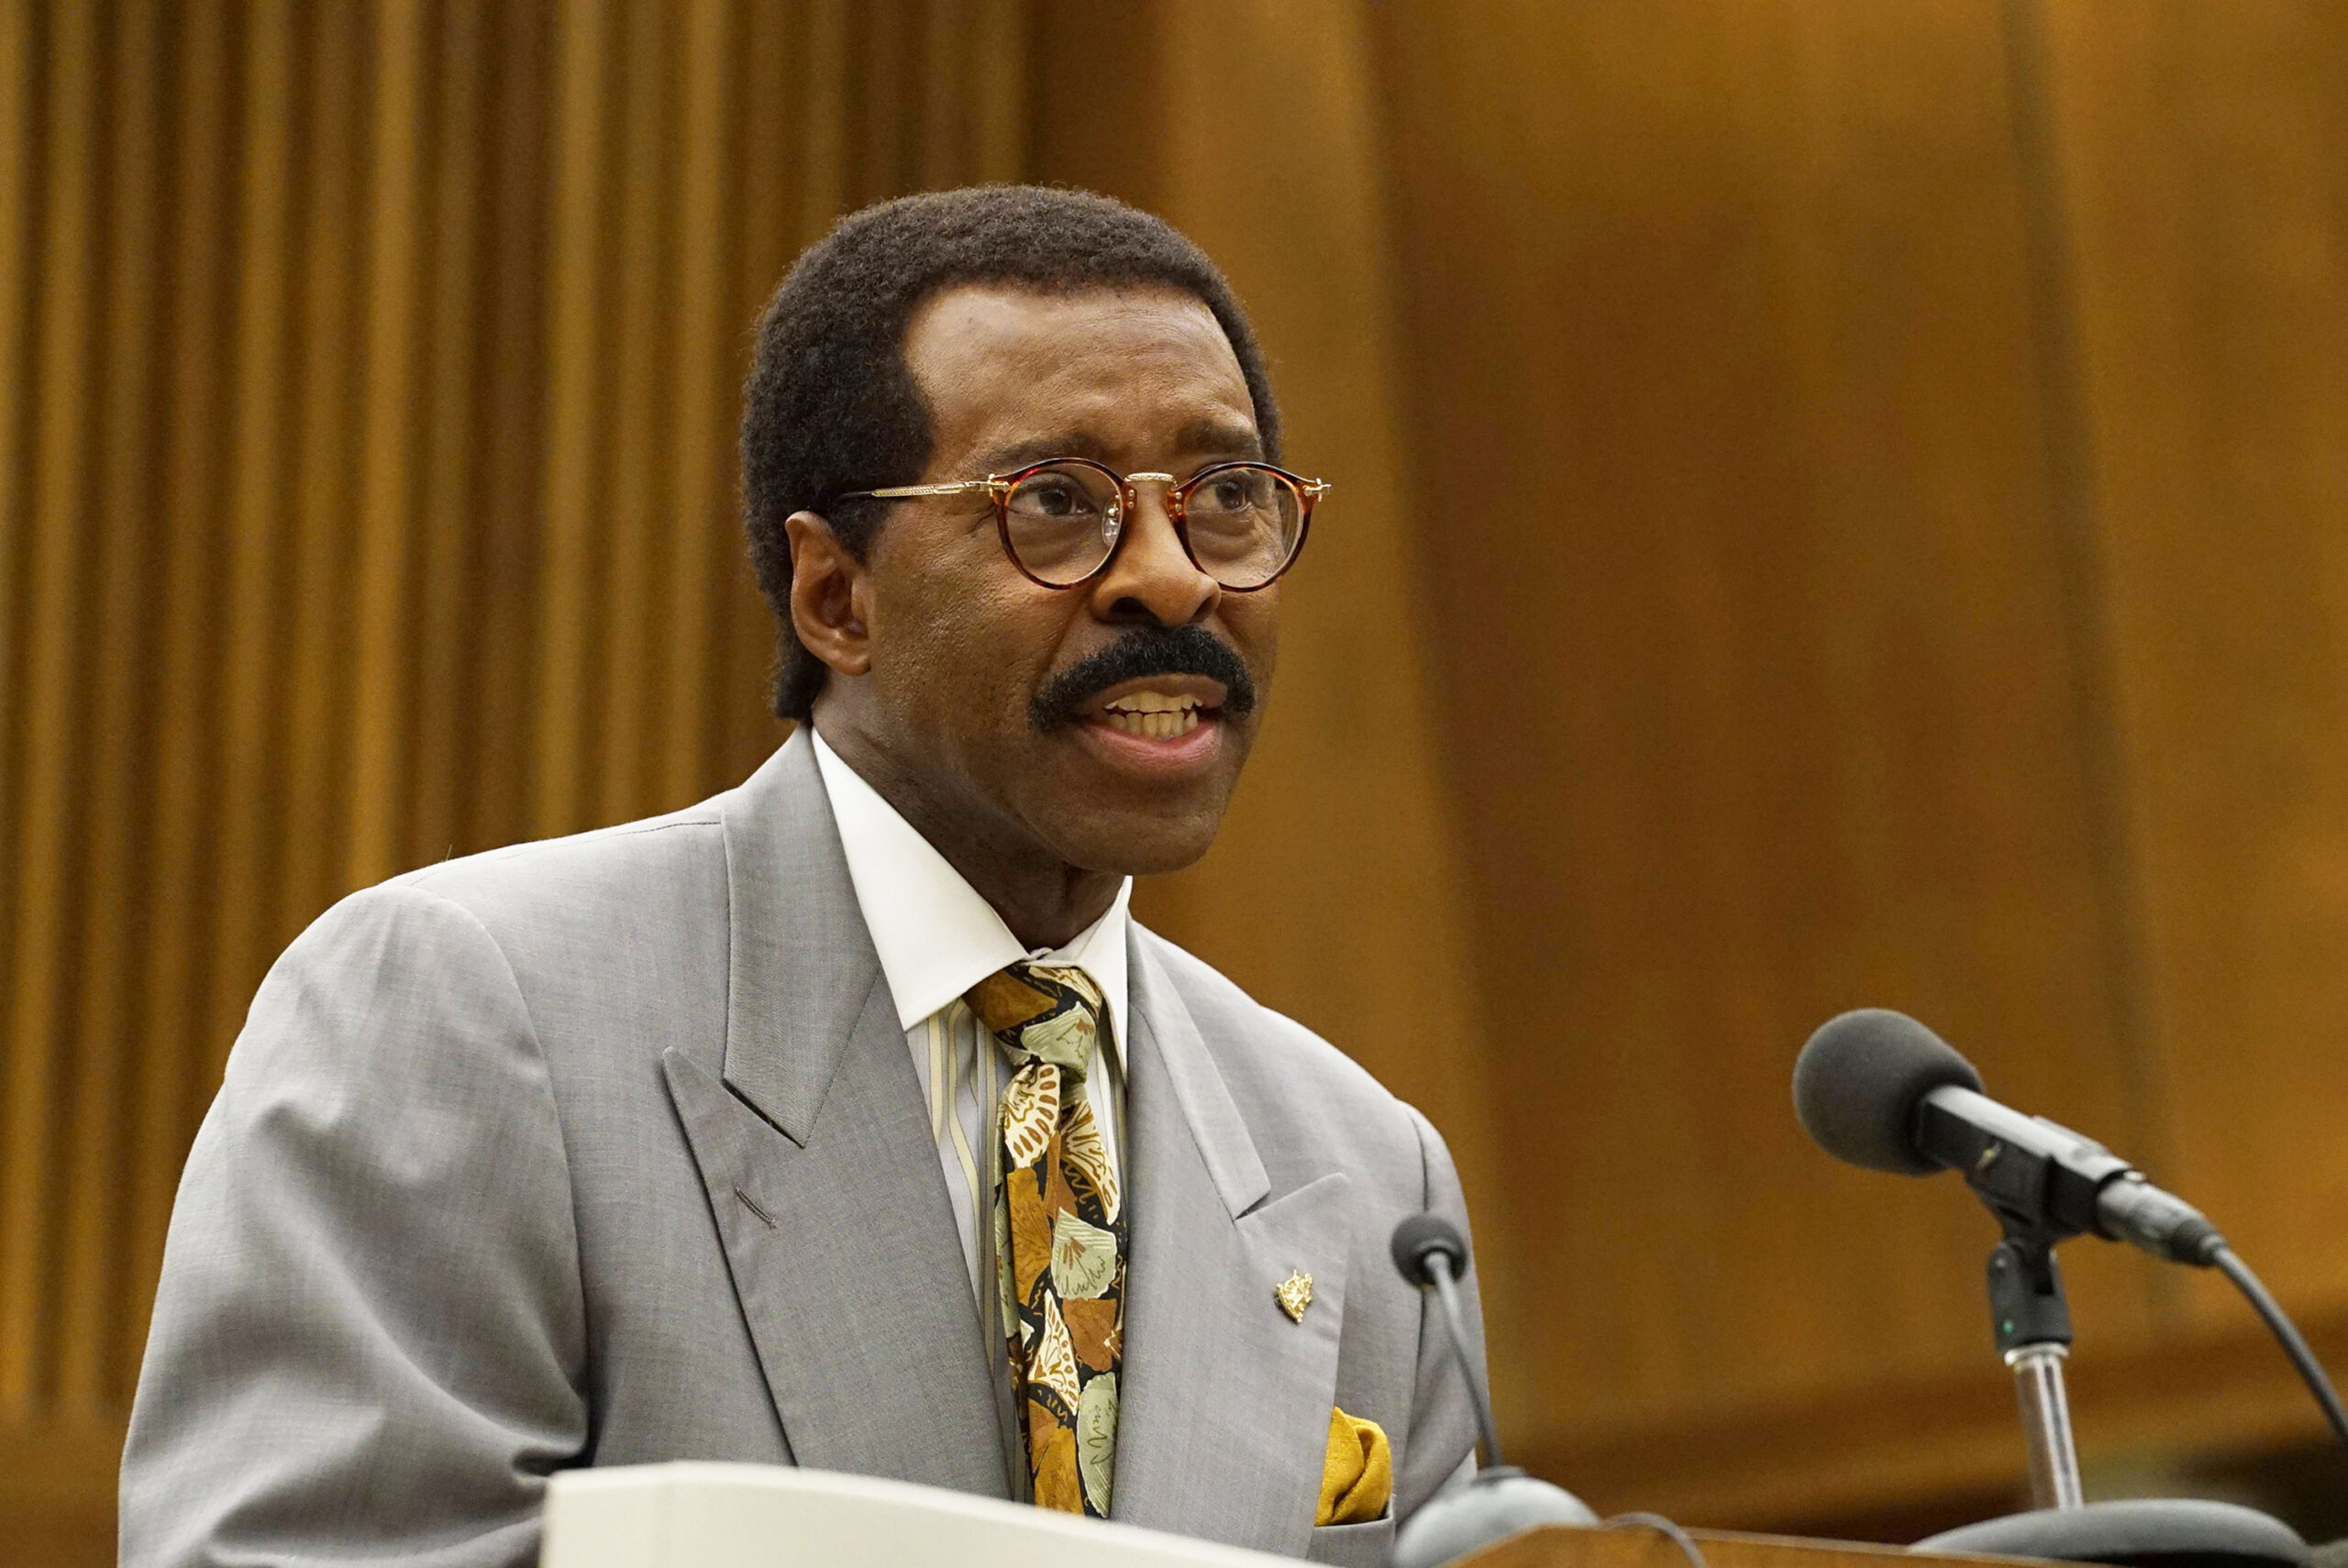 Johnnie Cochran Biography, Net Worth, Age, Height, Weight, Girlfriend, Family, Fact, and More